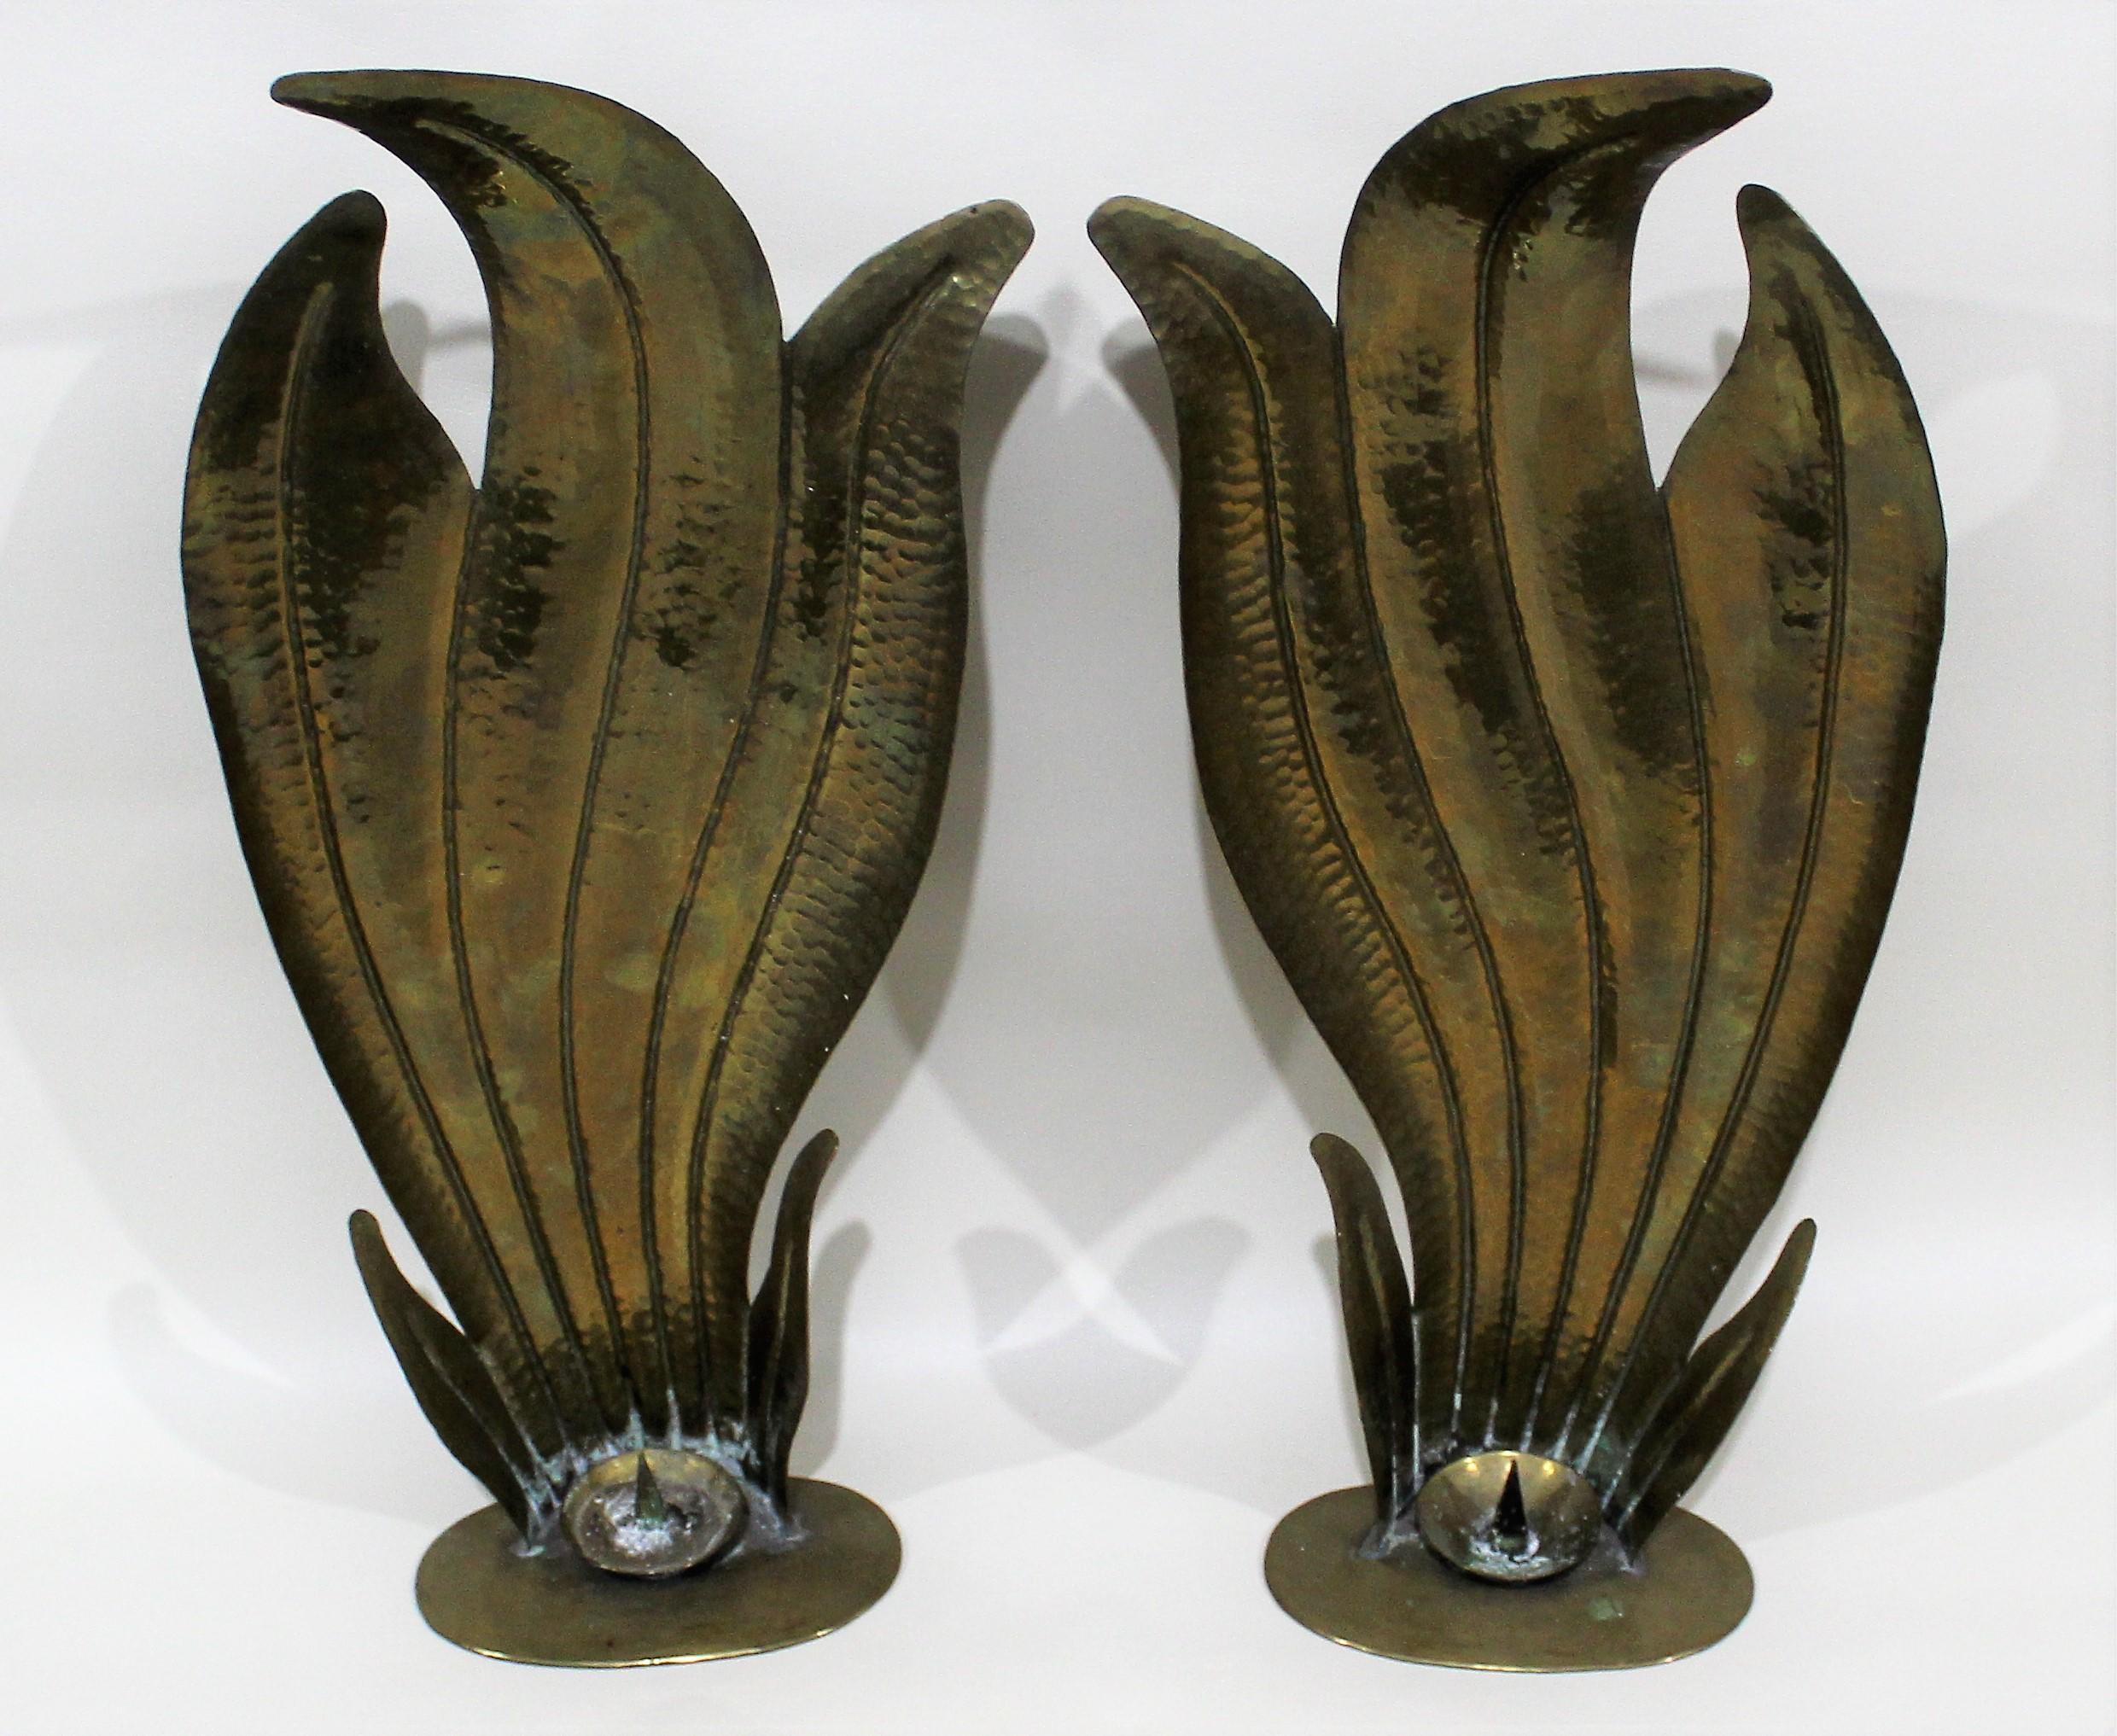 Pair of Egidio Casagrande Italian hand-hammered brass candle wall/table sconce's.